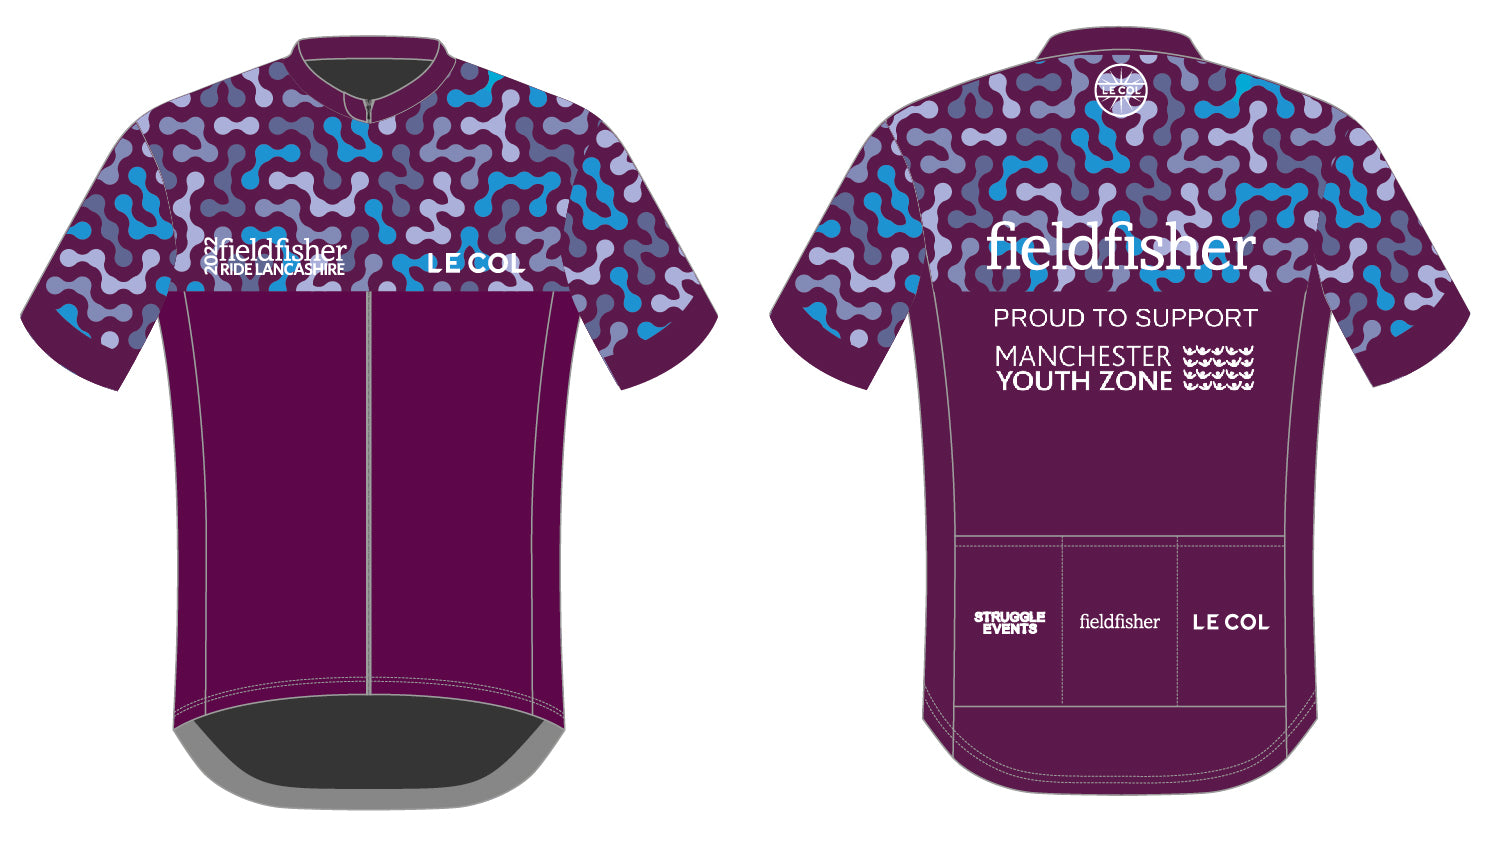 Fieldfisher Corporate cycling event jersey